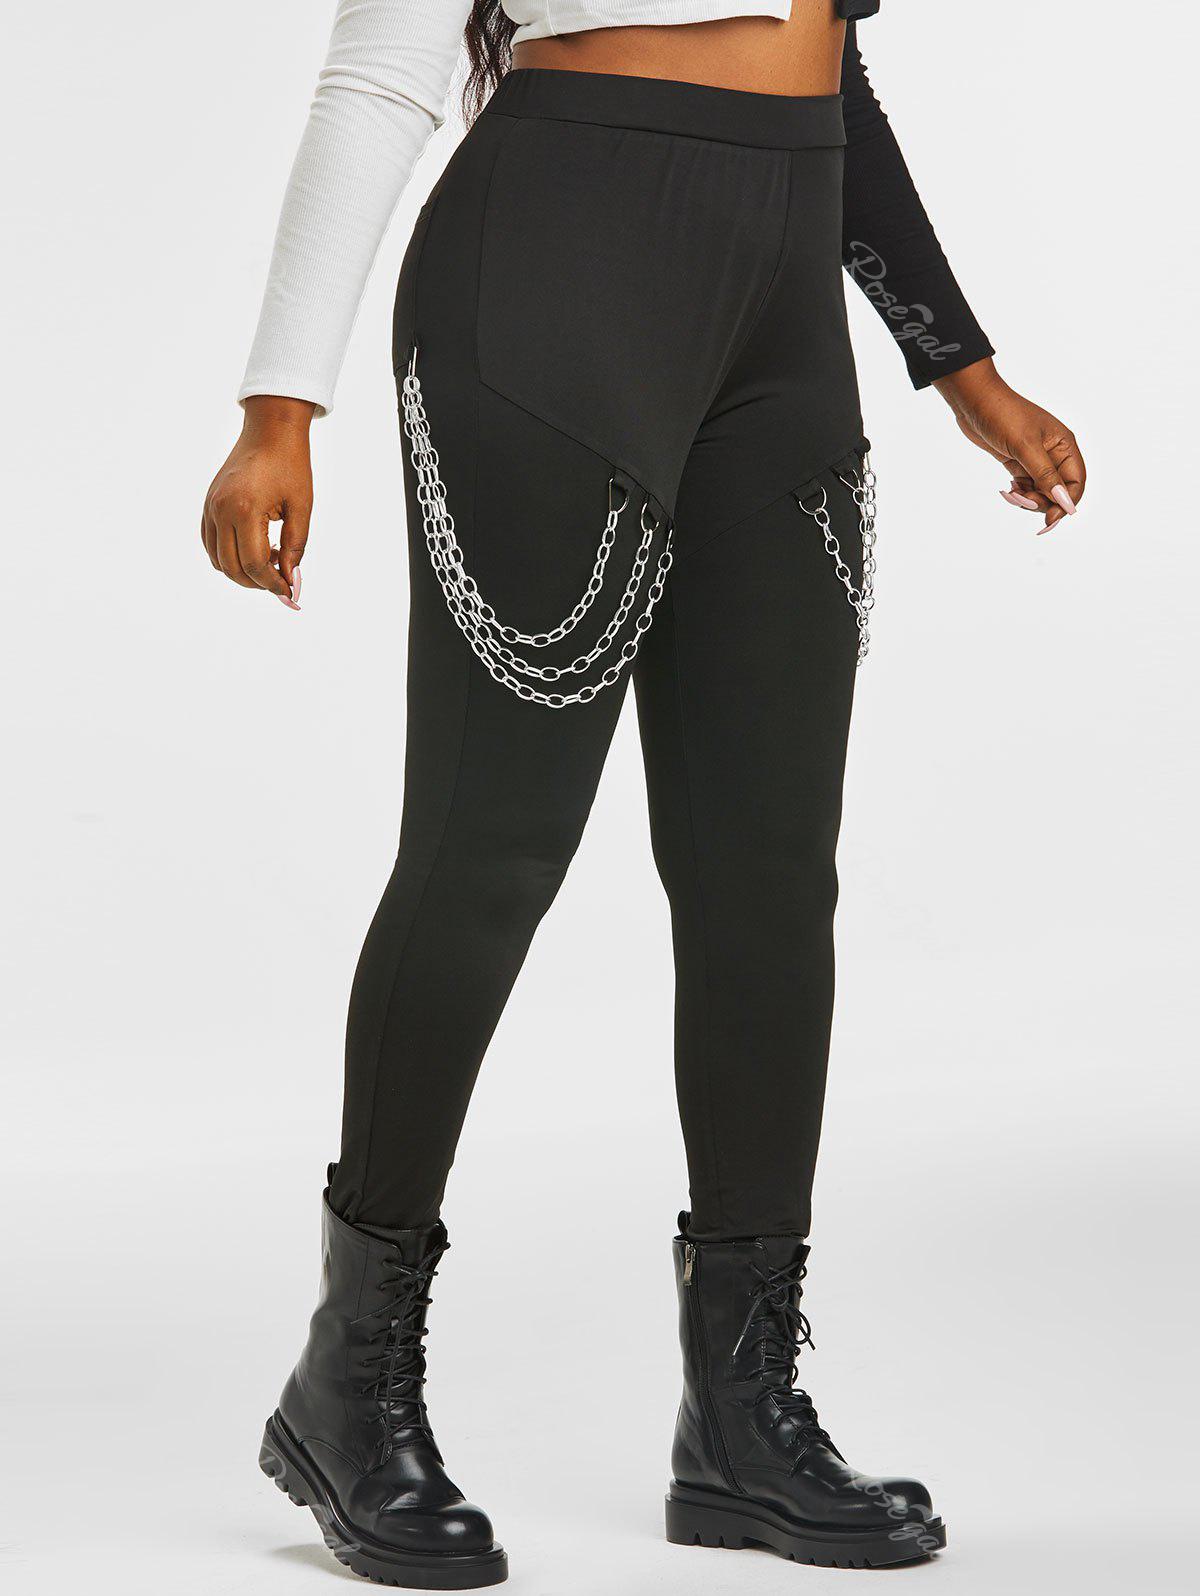 💗Andrea Loves💗 Gothic Chain Embellished High Waisted Pants